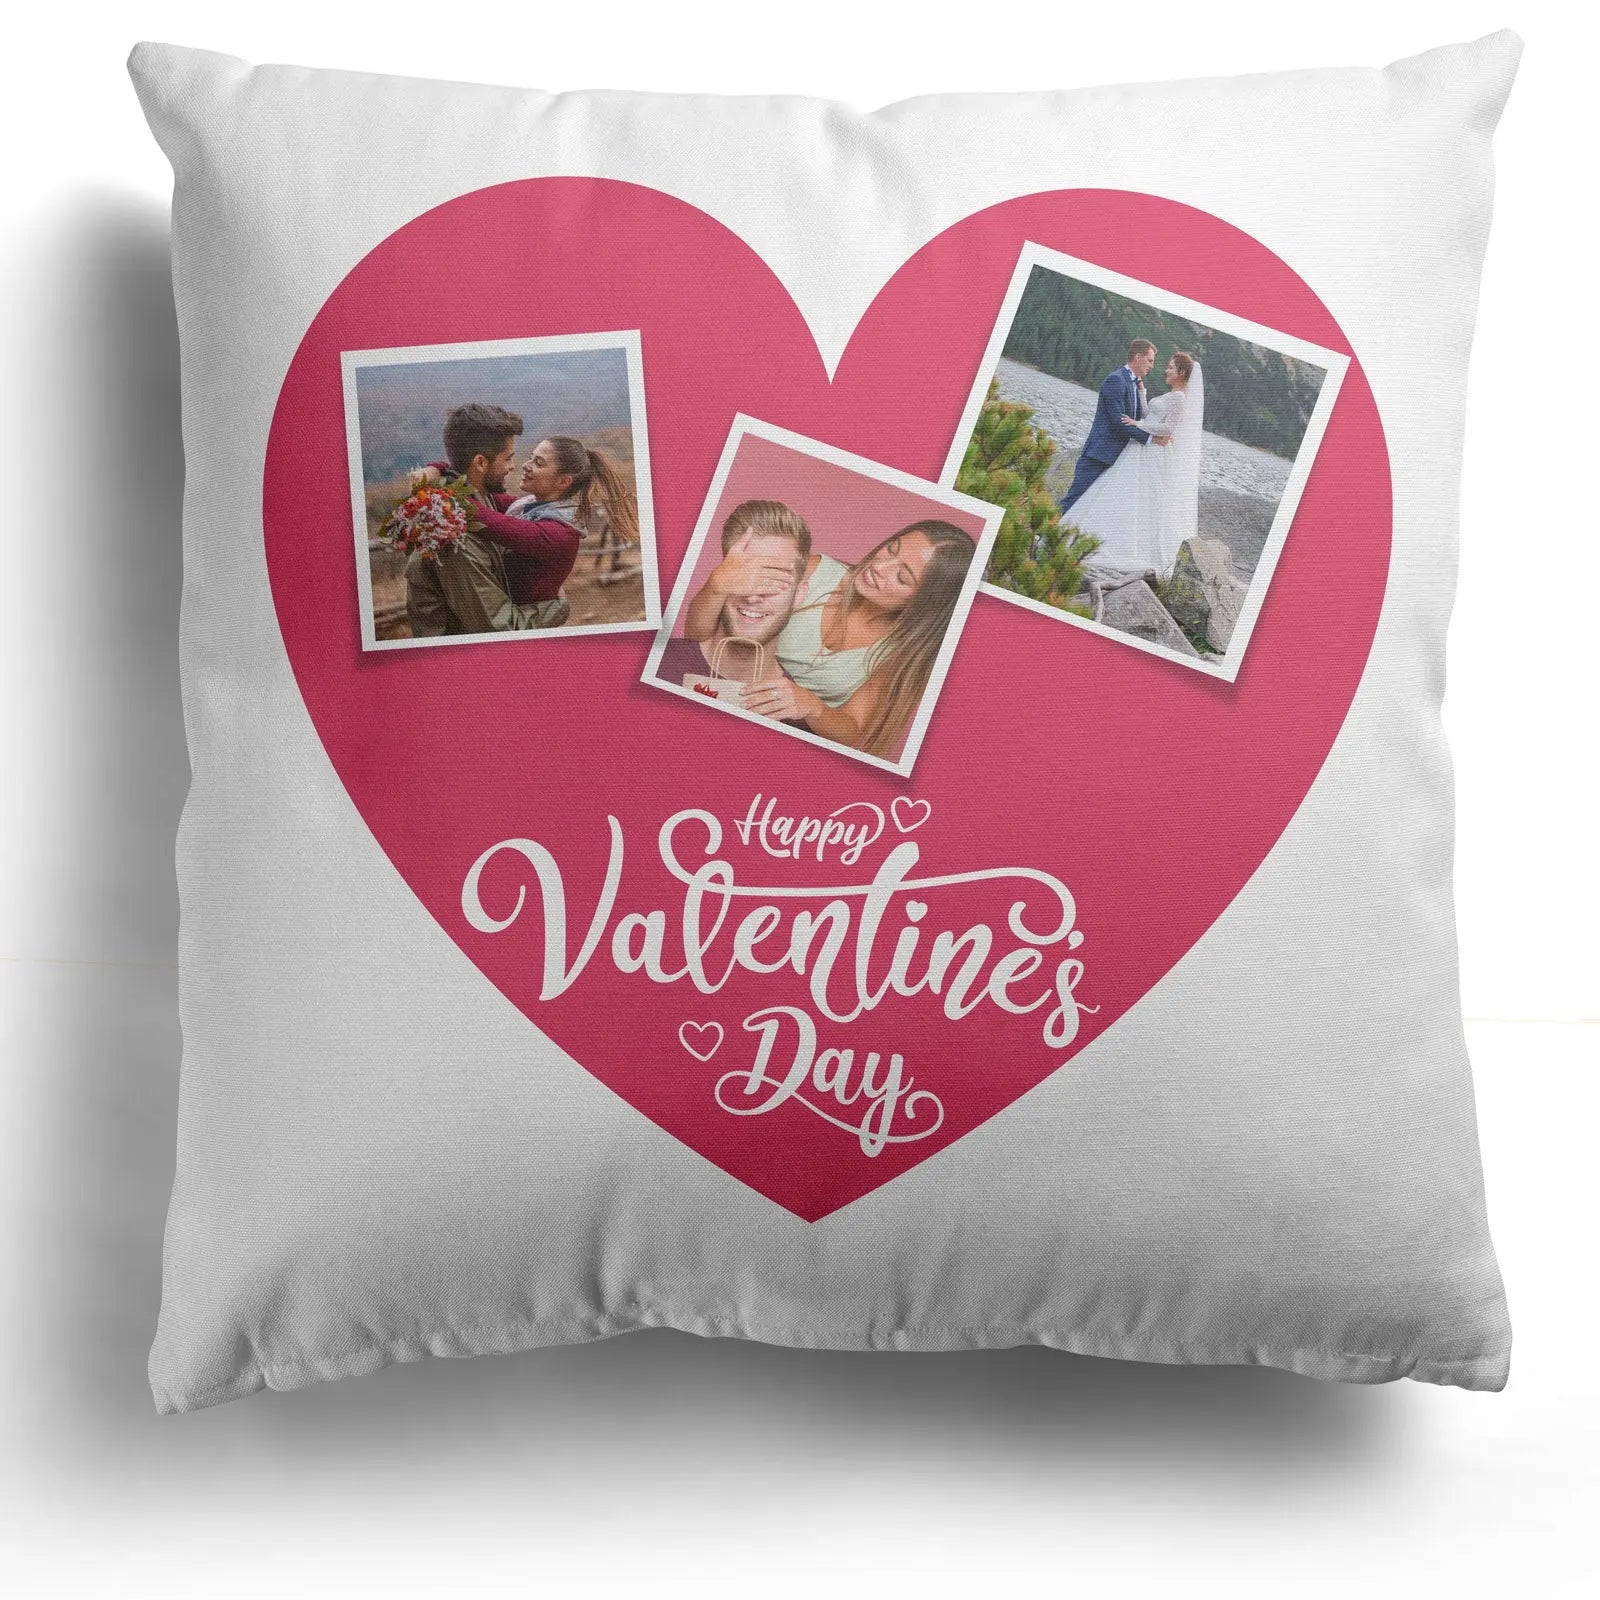 Personalised Cushion  Valentines Day  Couples & Romance  40x40cm 1 Image  Pink Heart